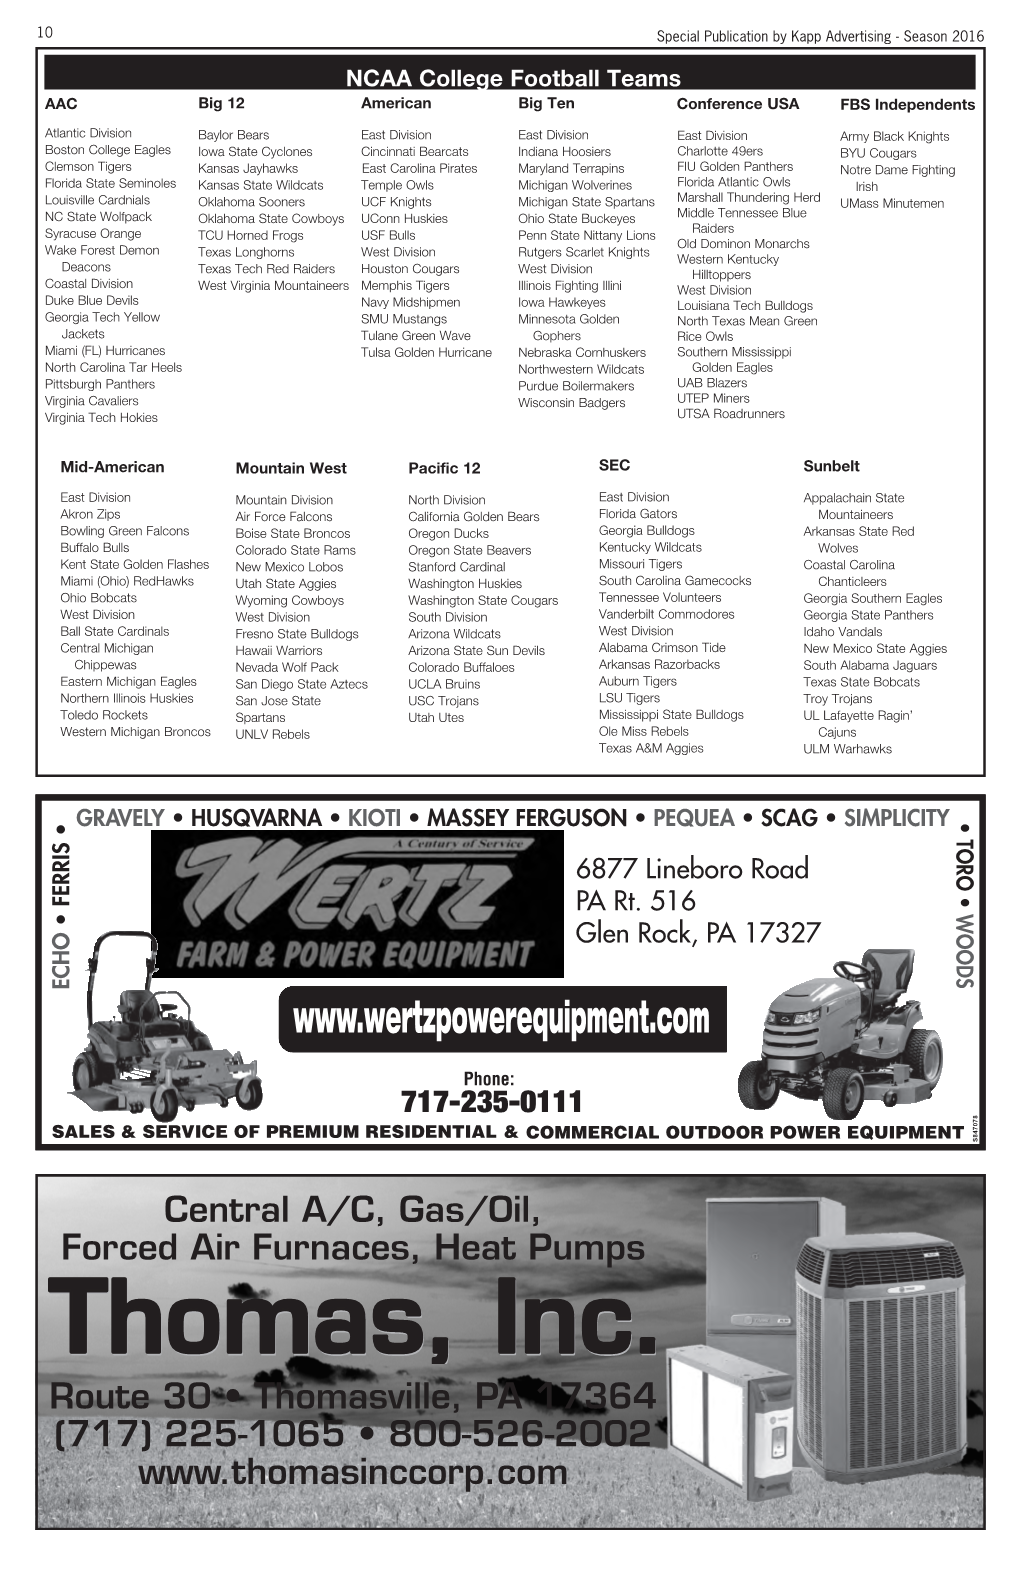 Route 30 • Thomasville, PA 17364 (717) 225-1065 • 800-526-2002 Central A/C, Gas/Oil, Forced Air Furna